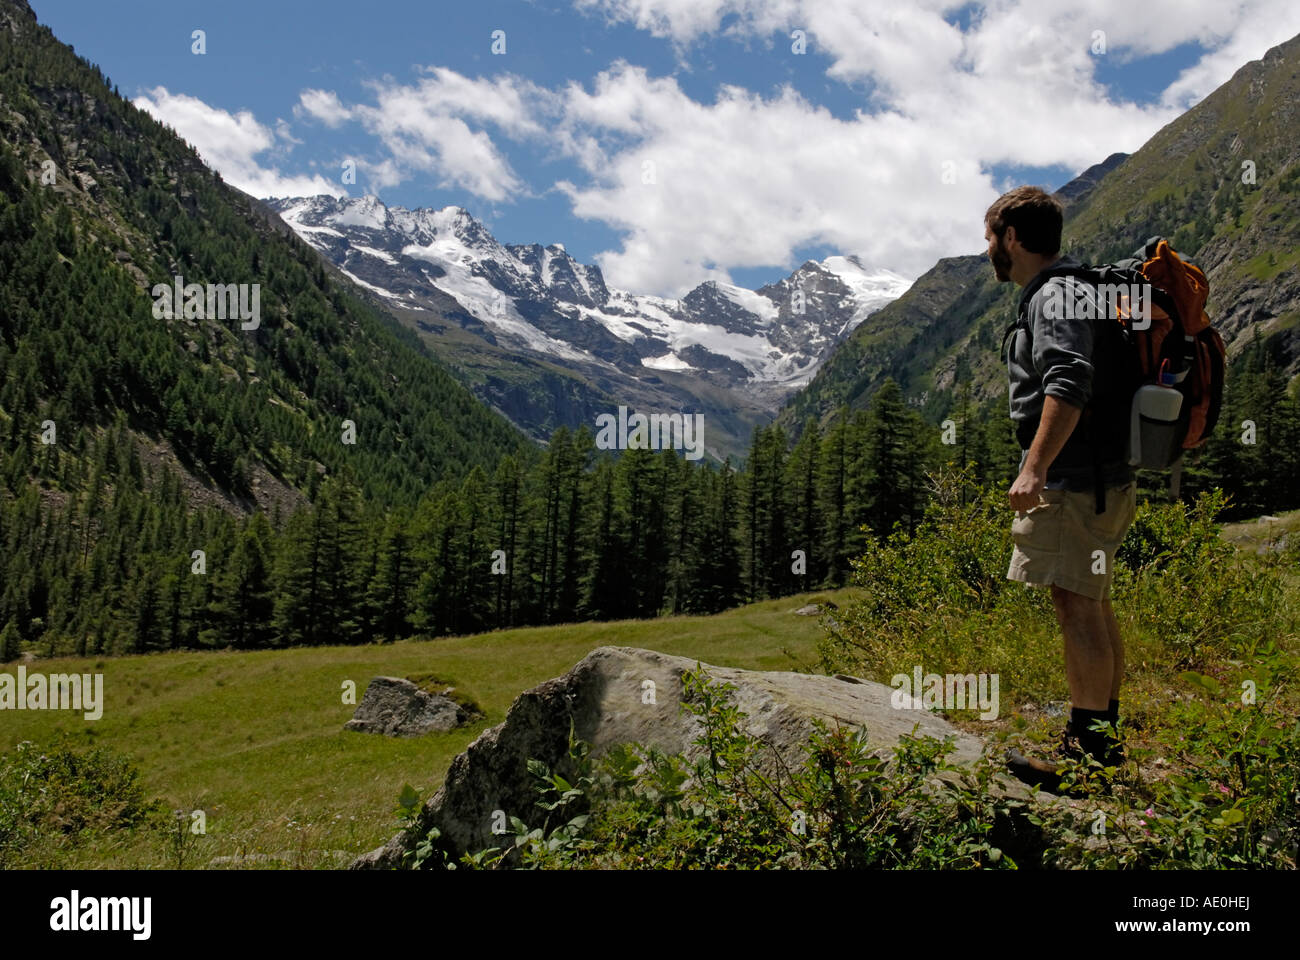 Backpacker, hiker, male, looking at alpine view, Gran Paradiso National Park, Italian Alps Stock Photo